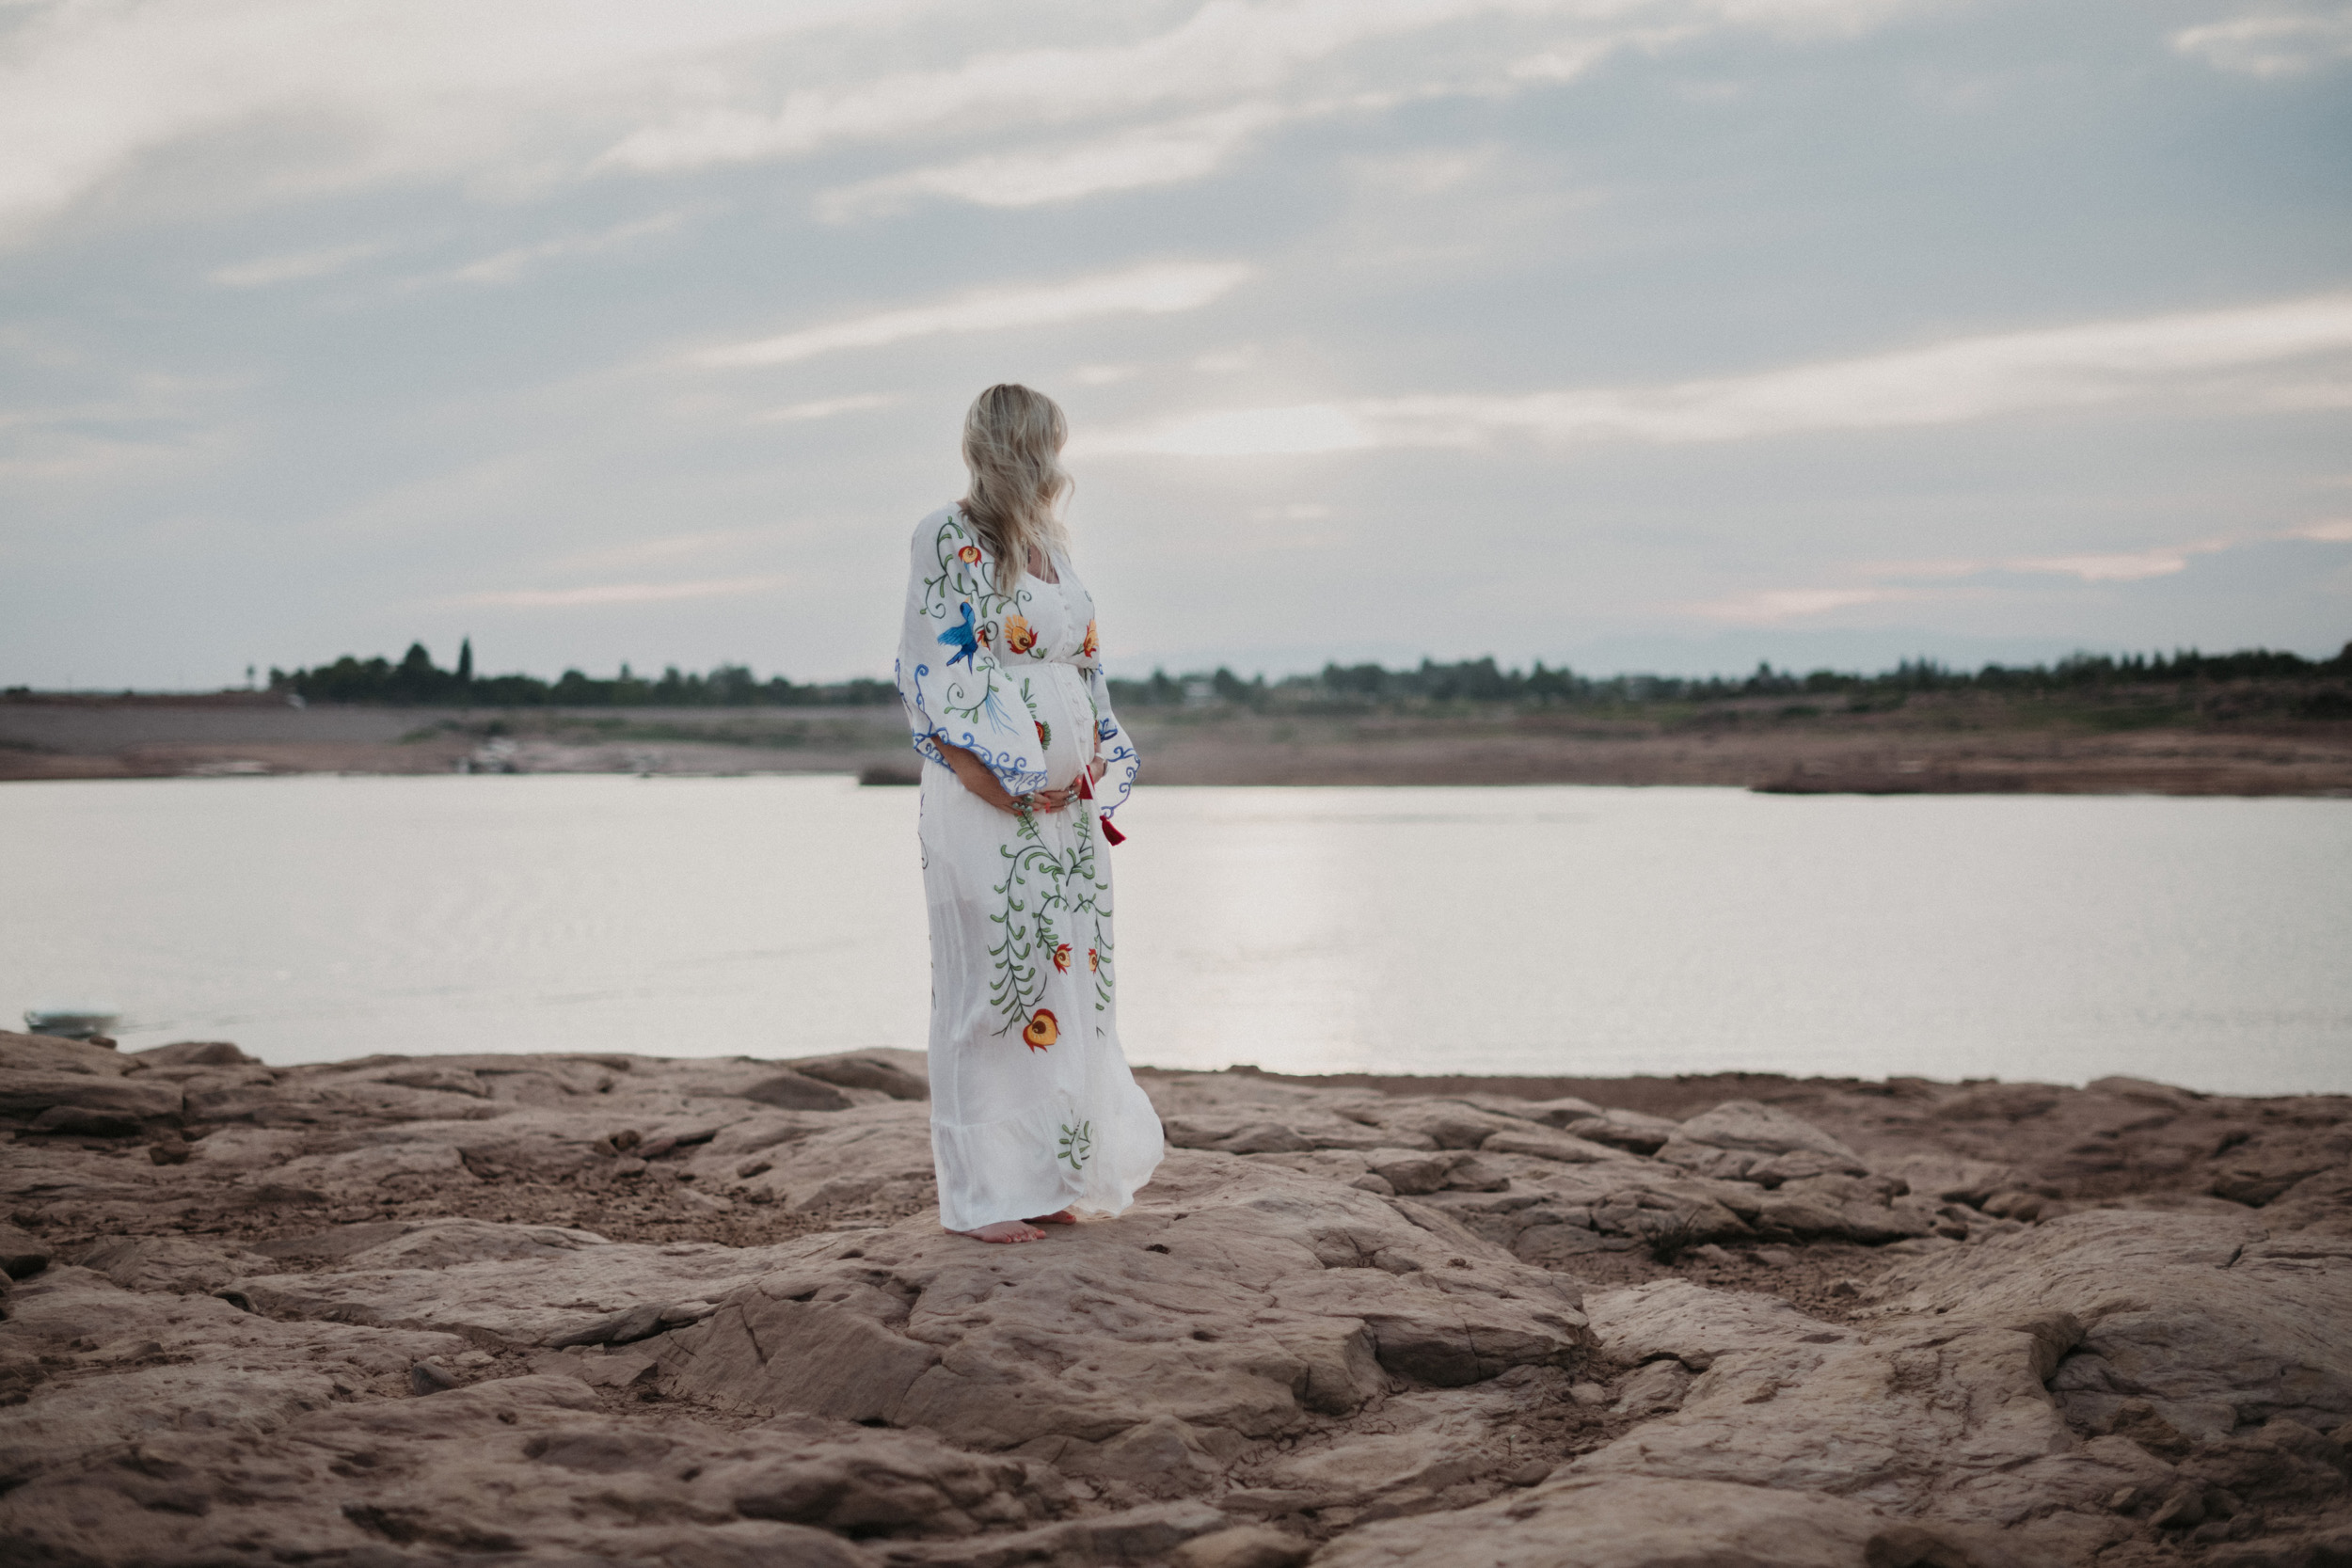 Pregnant woman in front of lake on rocks